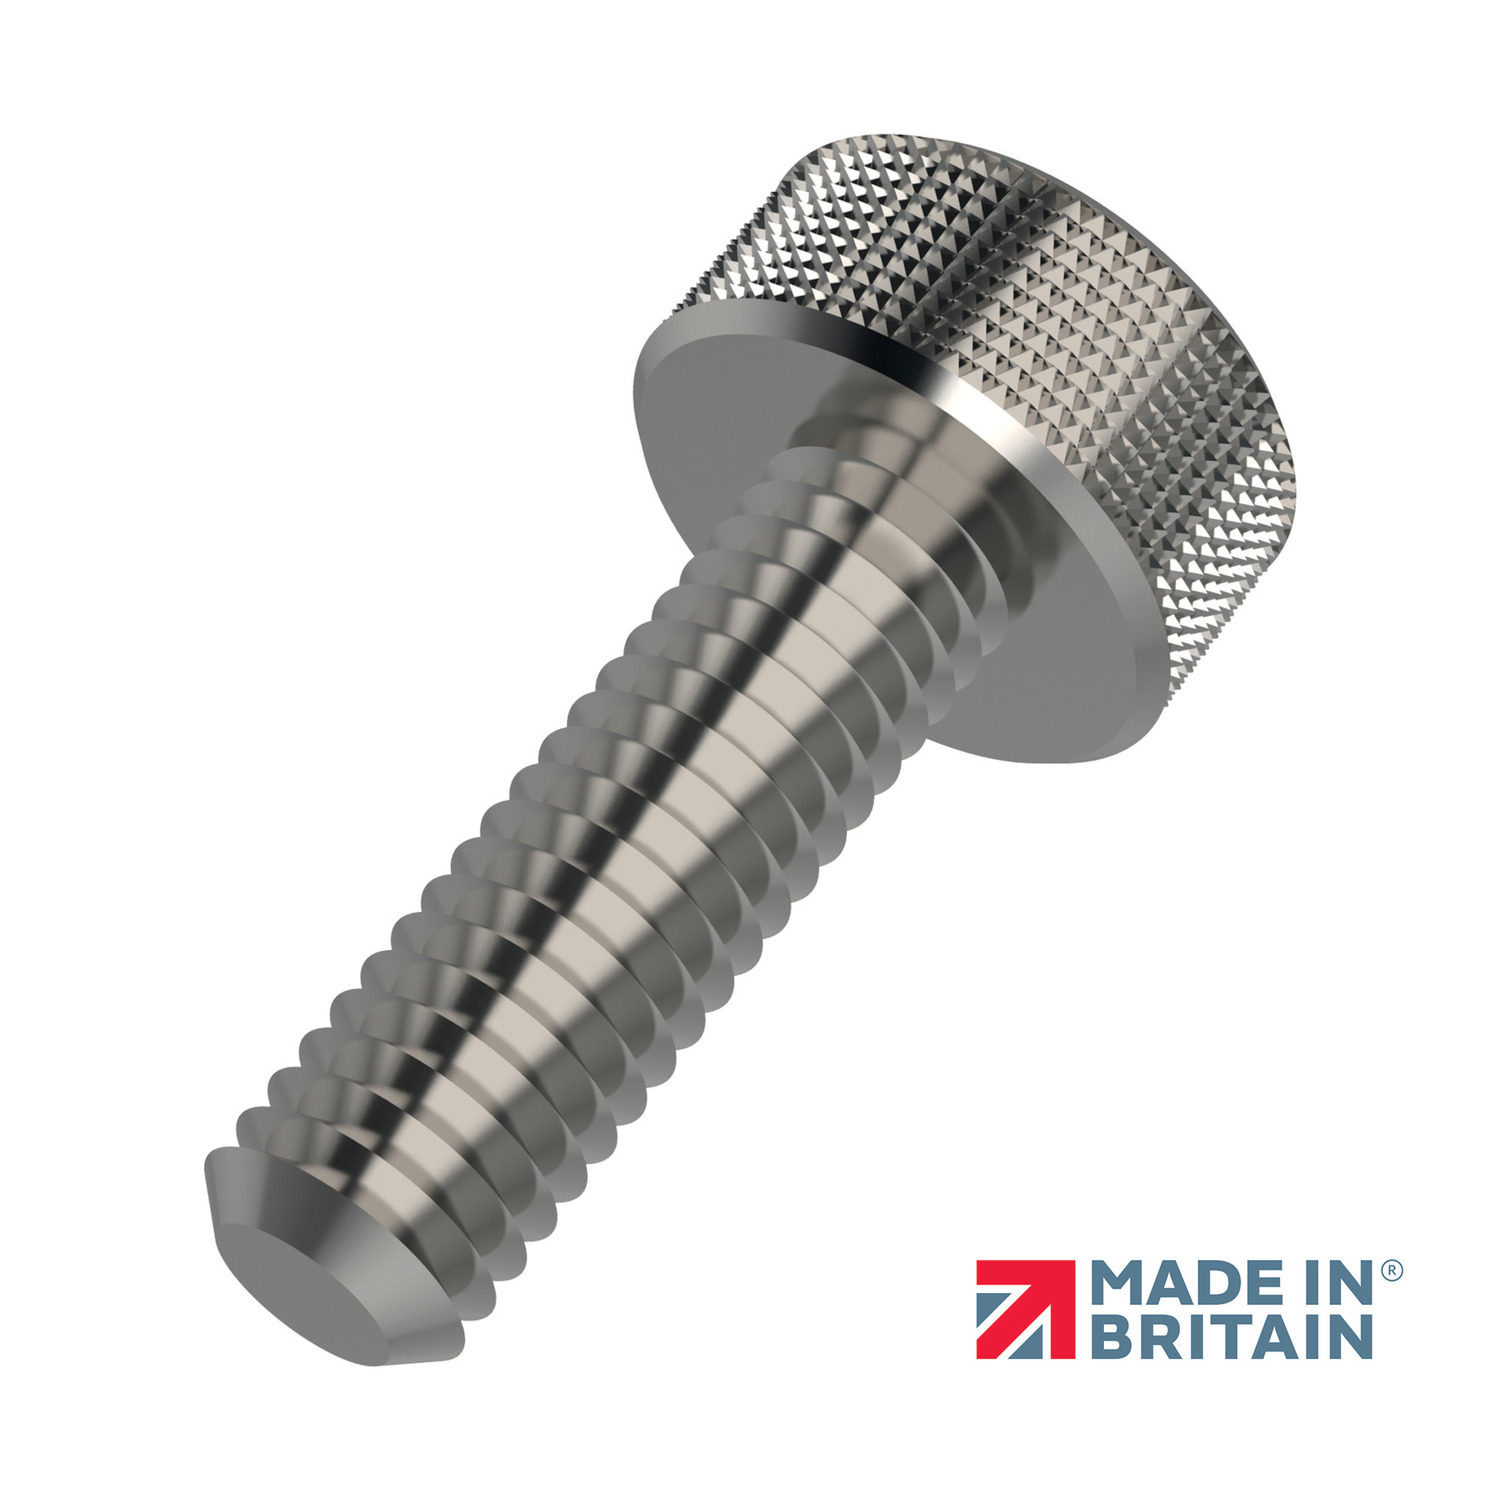 Product P0437.A2, Narrow Head Thumb Screws 303 series stainless / 